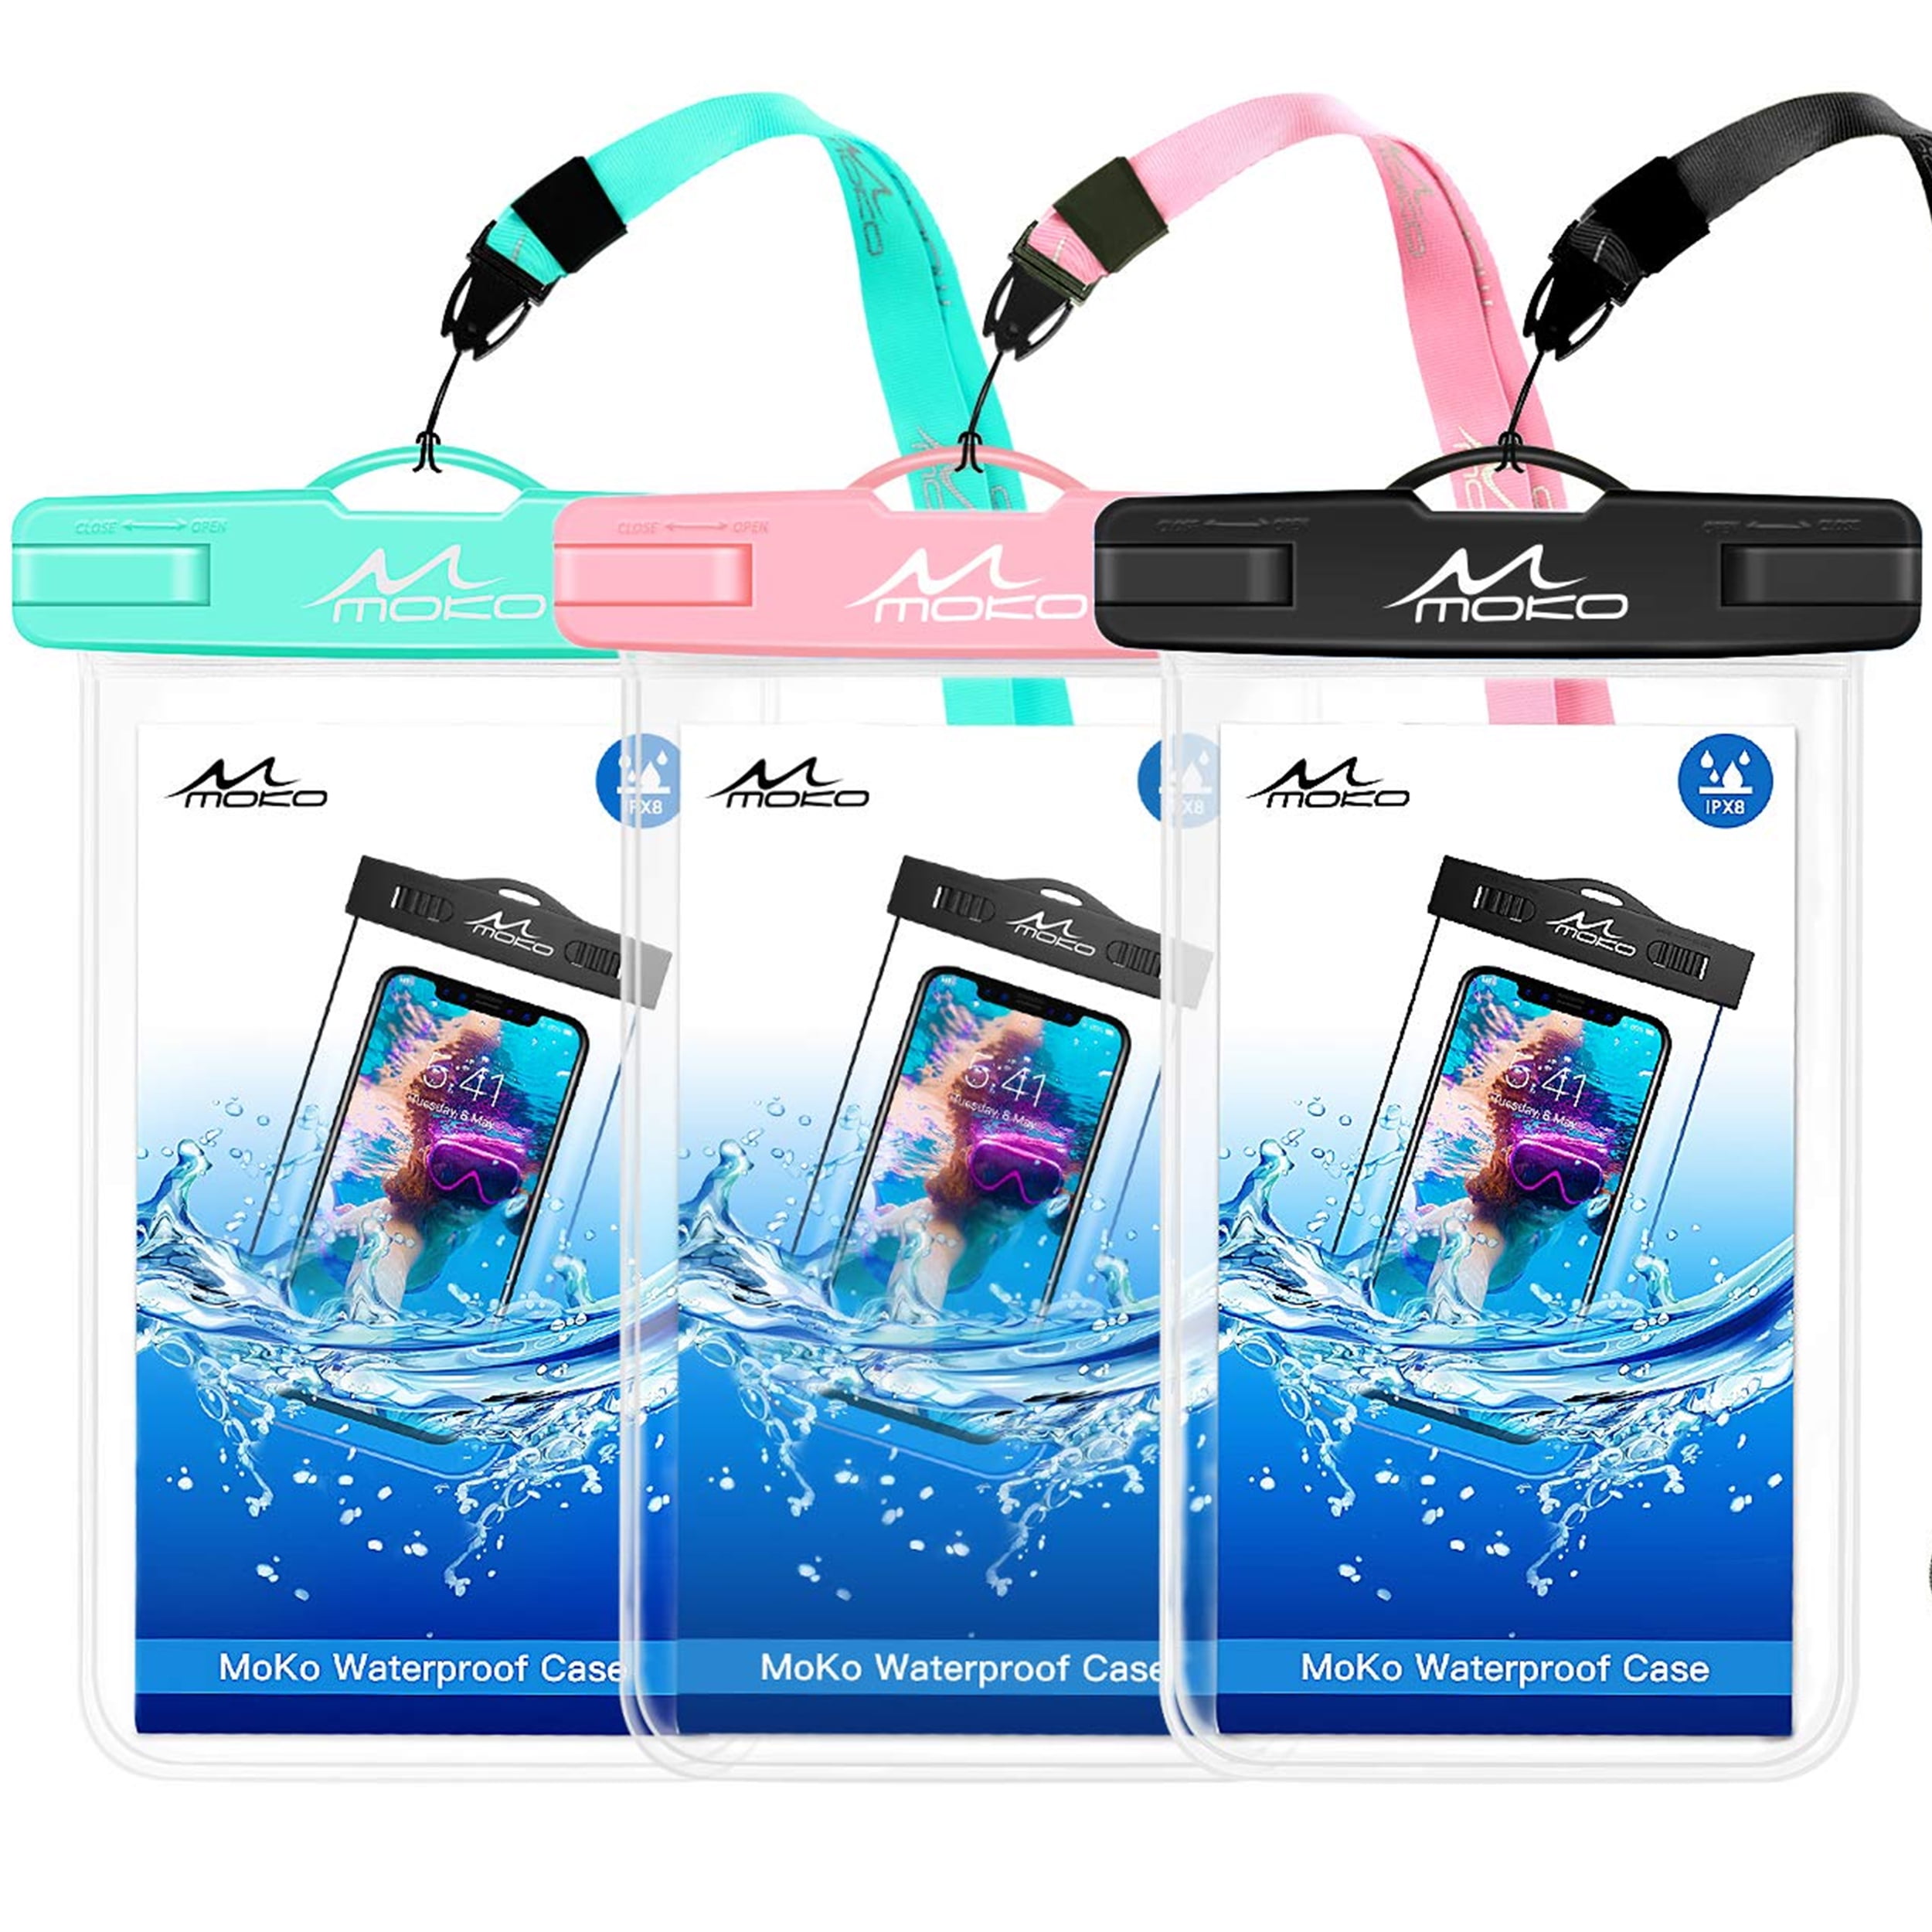 X/Xs/Xr/Xs Max MoKo Waterproof Phone Pouch Samsung S21/S20/S10/S9 Note 10 A10E iPhone 11 Pro Max Underwater Cellphone Case Dry Bag with Lanyard Armband Compatible with iPhone 12 Mini/12 Pro 8 